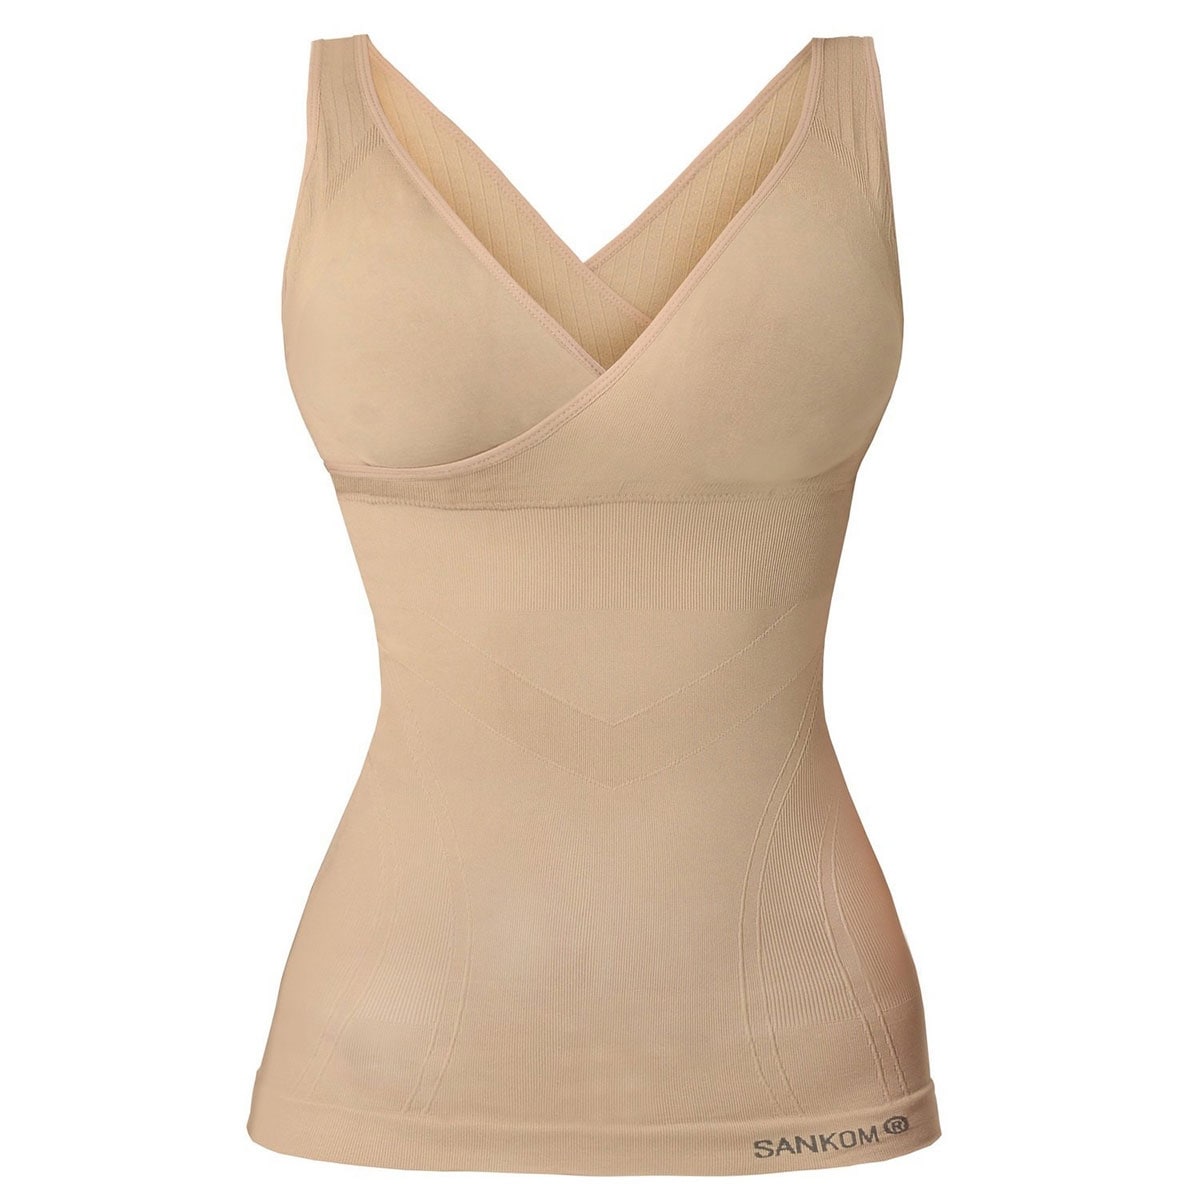 https://ak1.ostkcdn.com/images/products/is/images/direct/c842e616e0bbc682c1e637898ee79c39cfe006d6/SANKOM-Patent-Shaping-Camisole-Bra-Cooling-Fibers-Beige--XL-XXL.jpg